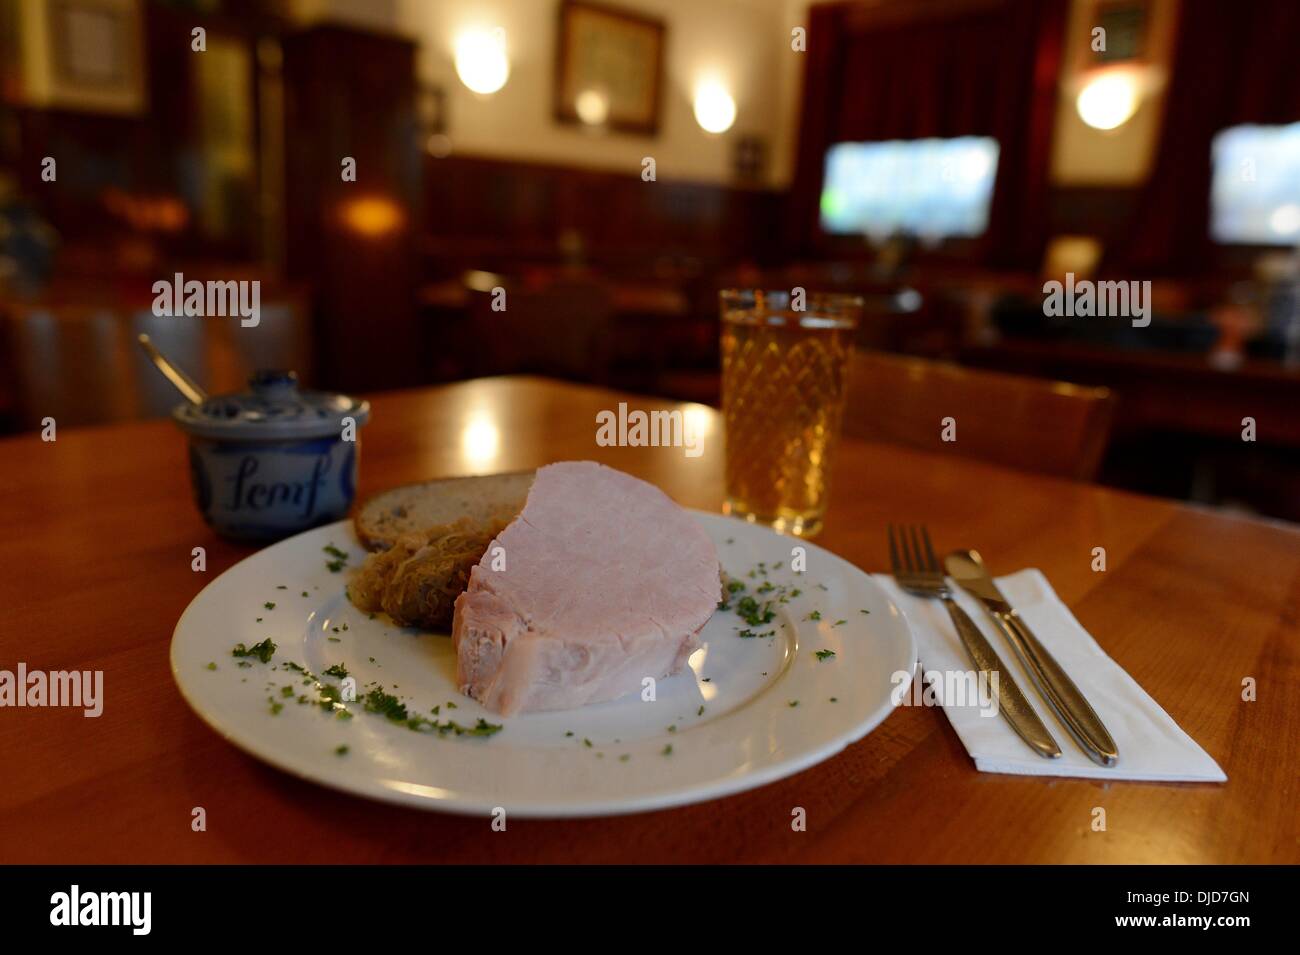 A glass of cider with a plate of loin ribs, bread and a pot of mustard are seen in a typical Frankfurt cider tavern on 21.11.2013. Photo: Frank May Stock Photo